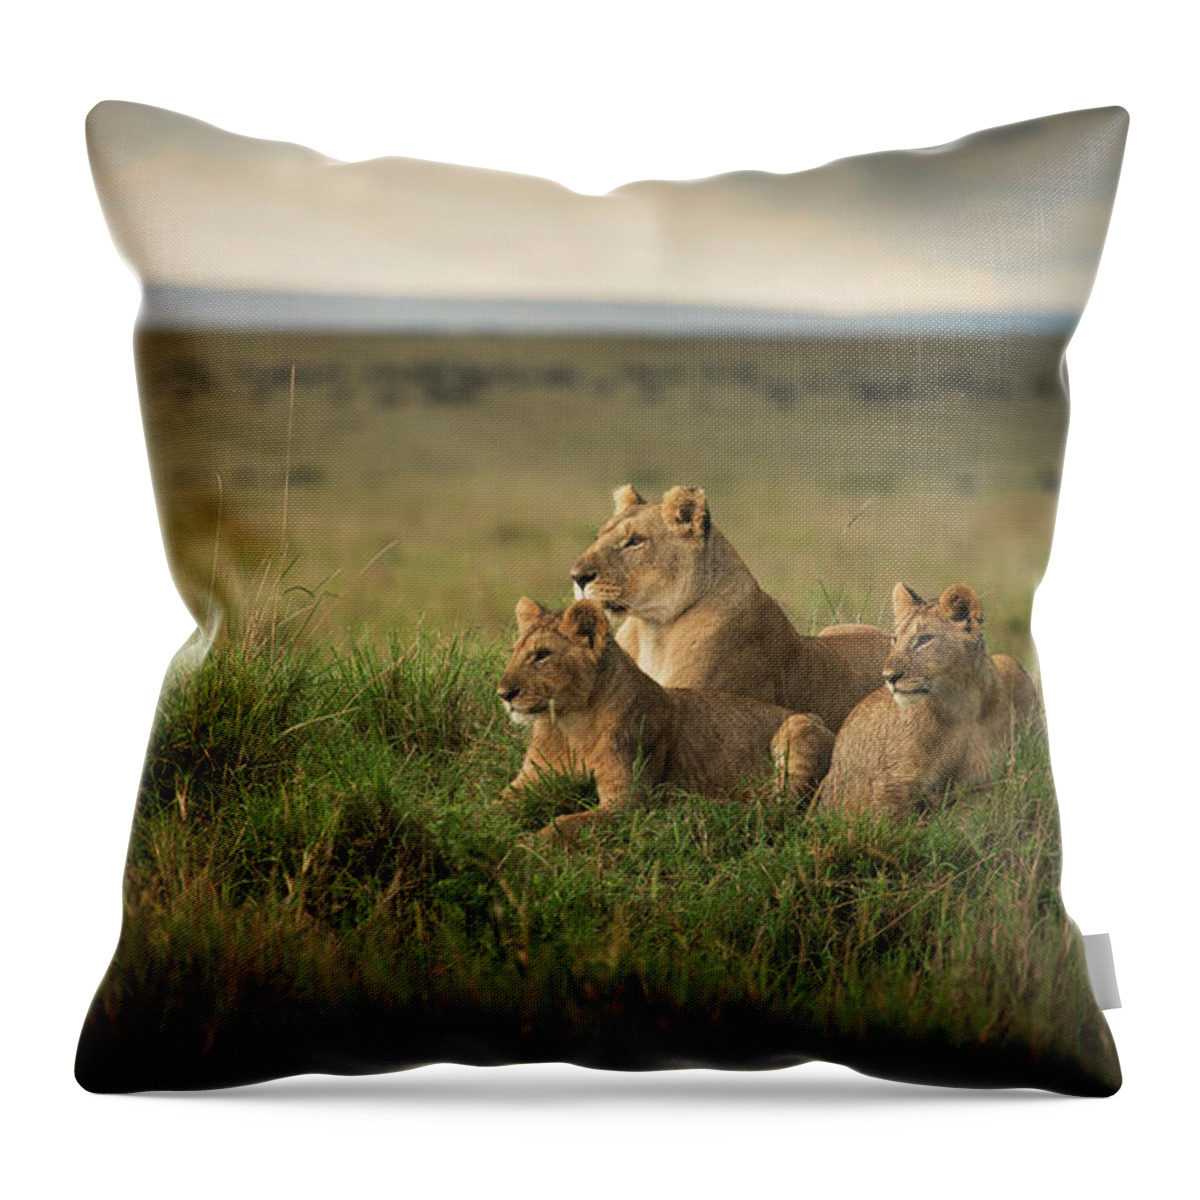 Tranquility Throw Pillow featuring the photograph Lioness And Cubs Laying In Remote Field by Ac Productions